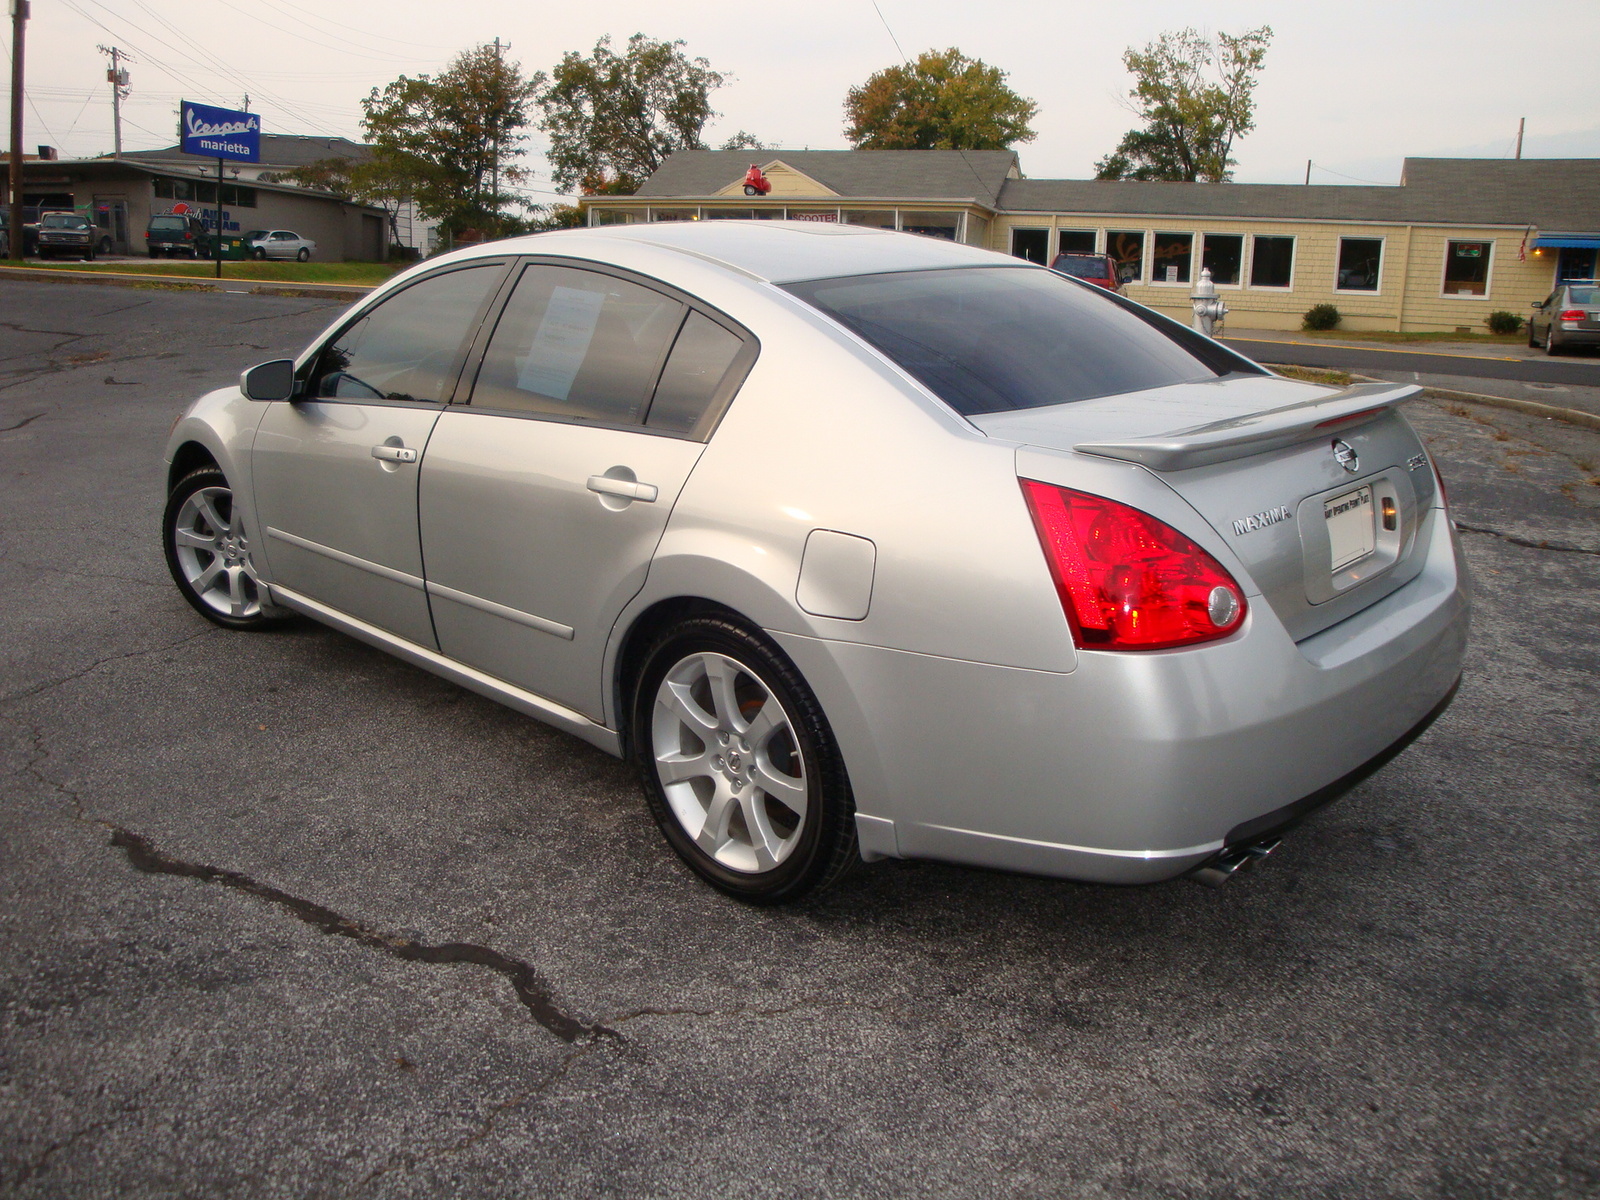 Used 2008 nissan maxima sl review #1